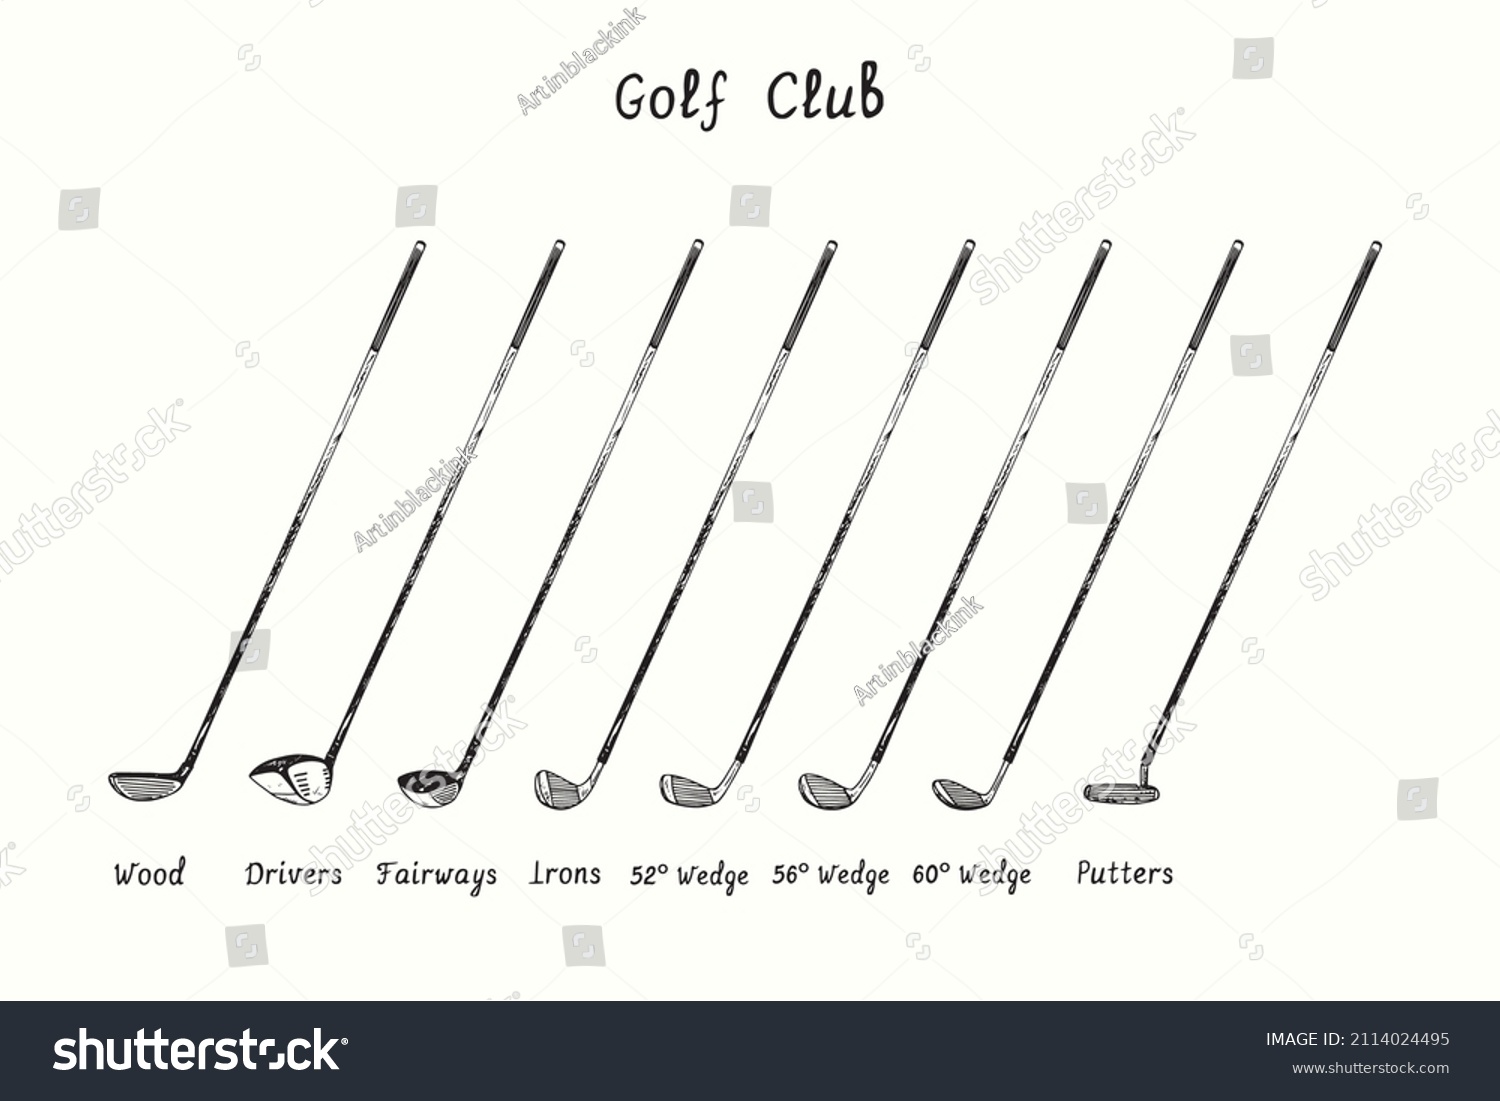 Golf Club types. Wood, Drivers, Fairways, Irons,  52° Wedge, 56° Wedge, 60° Wedge, Putters. Ink black and white doodle drawing in woodcut style. #2114024495